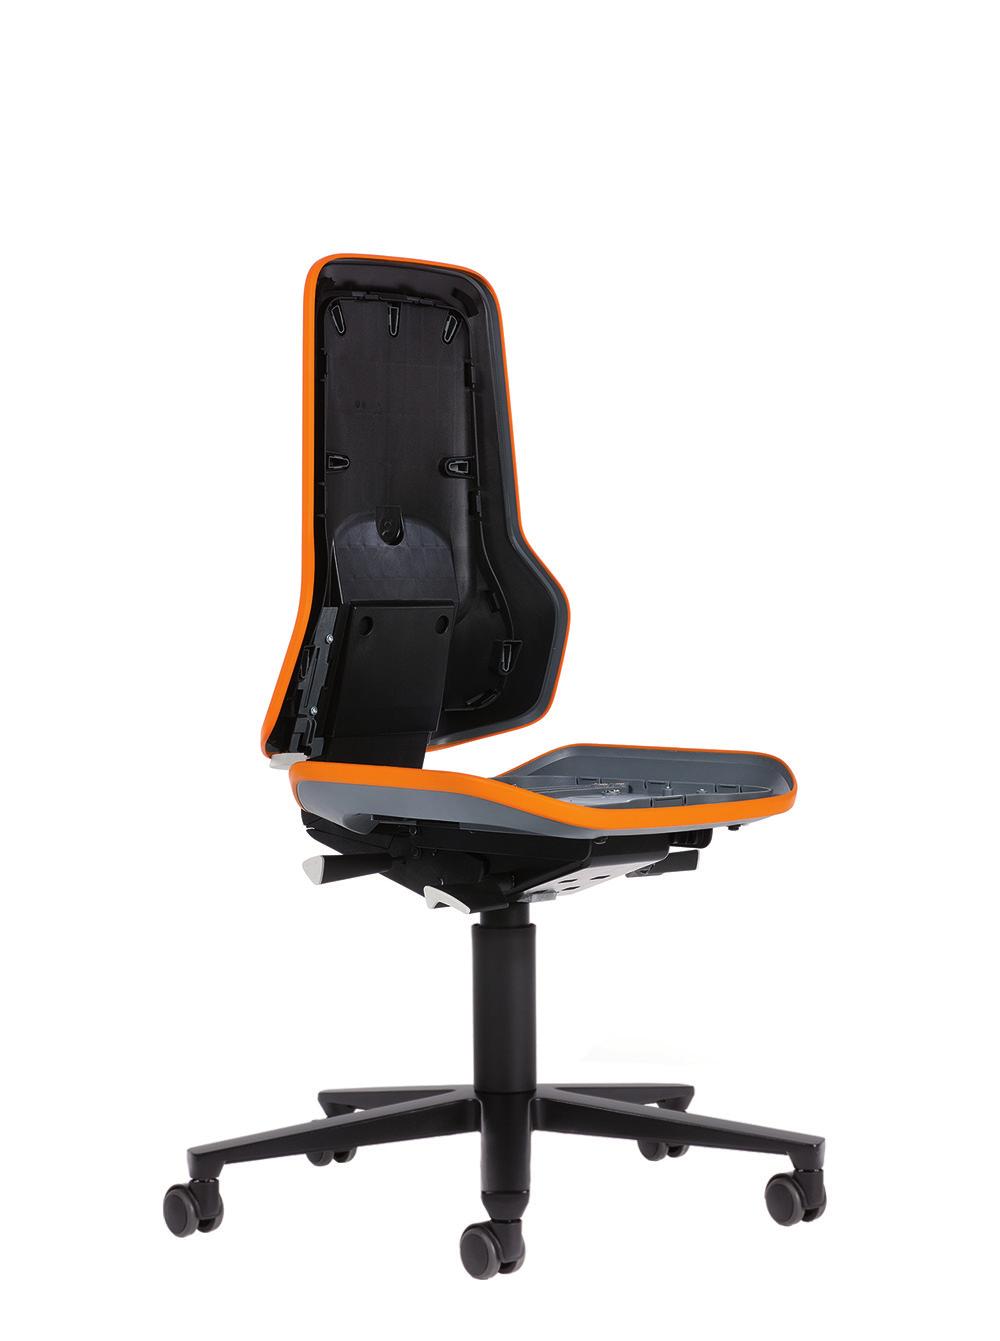 Neon New generation workplace chair All the same s and features as in ErgoPlus In addition changeable upholstery and flex strip for protection of the chair and its environment Neon chair consists of